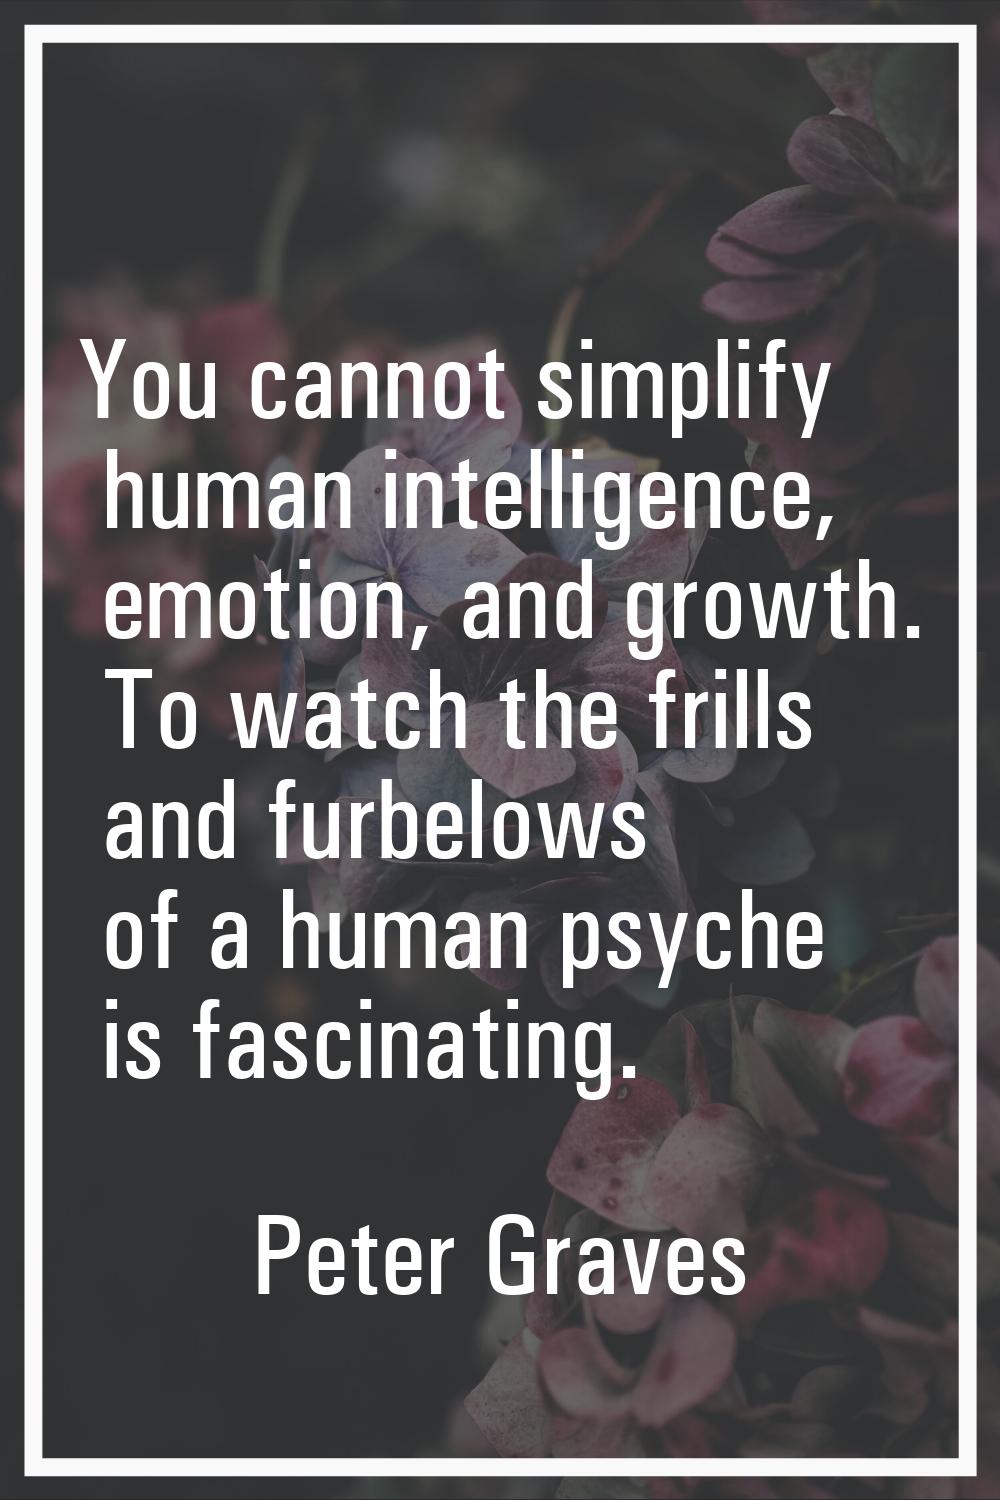 You cannot simplify human intelligence, emotion, and growth. To watch the frills and furbelows of a